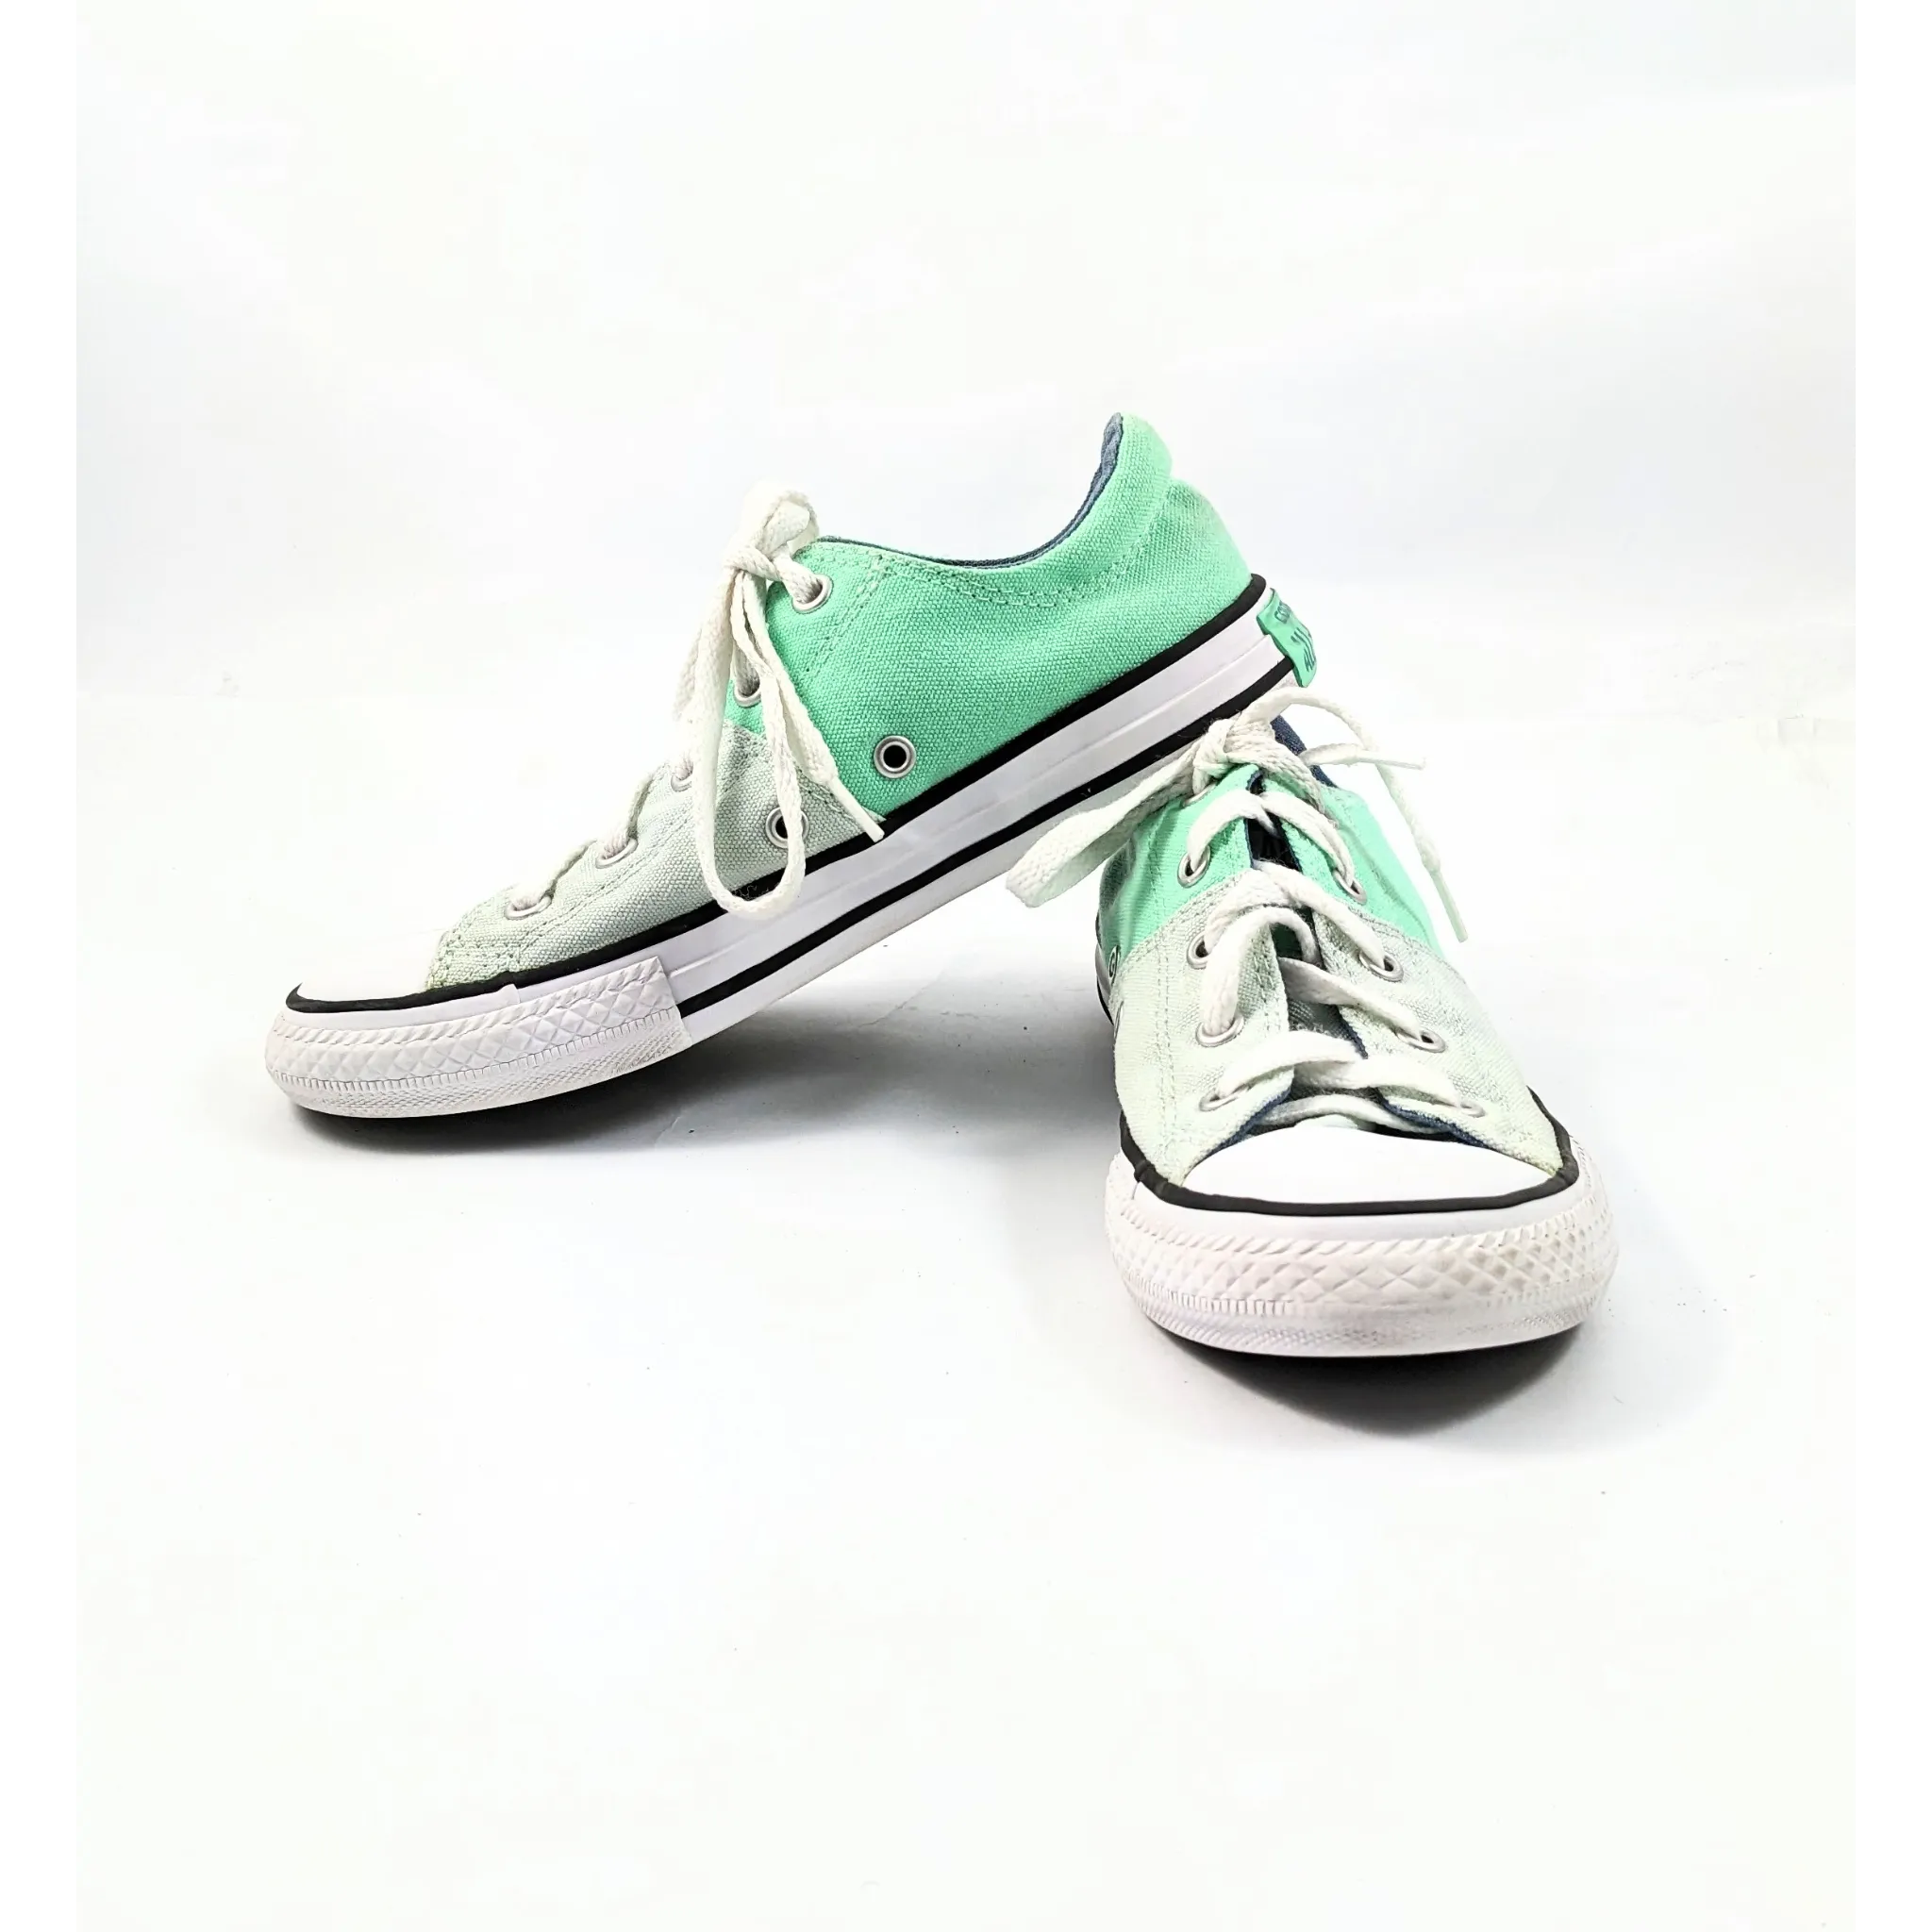 Converse Green Sneakers